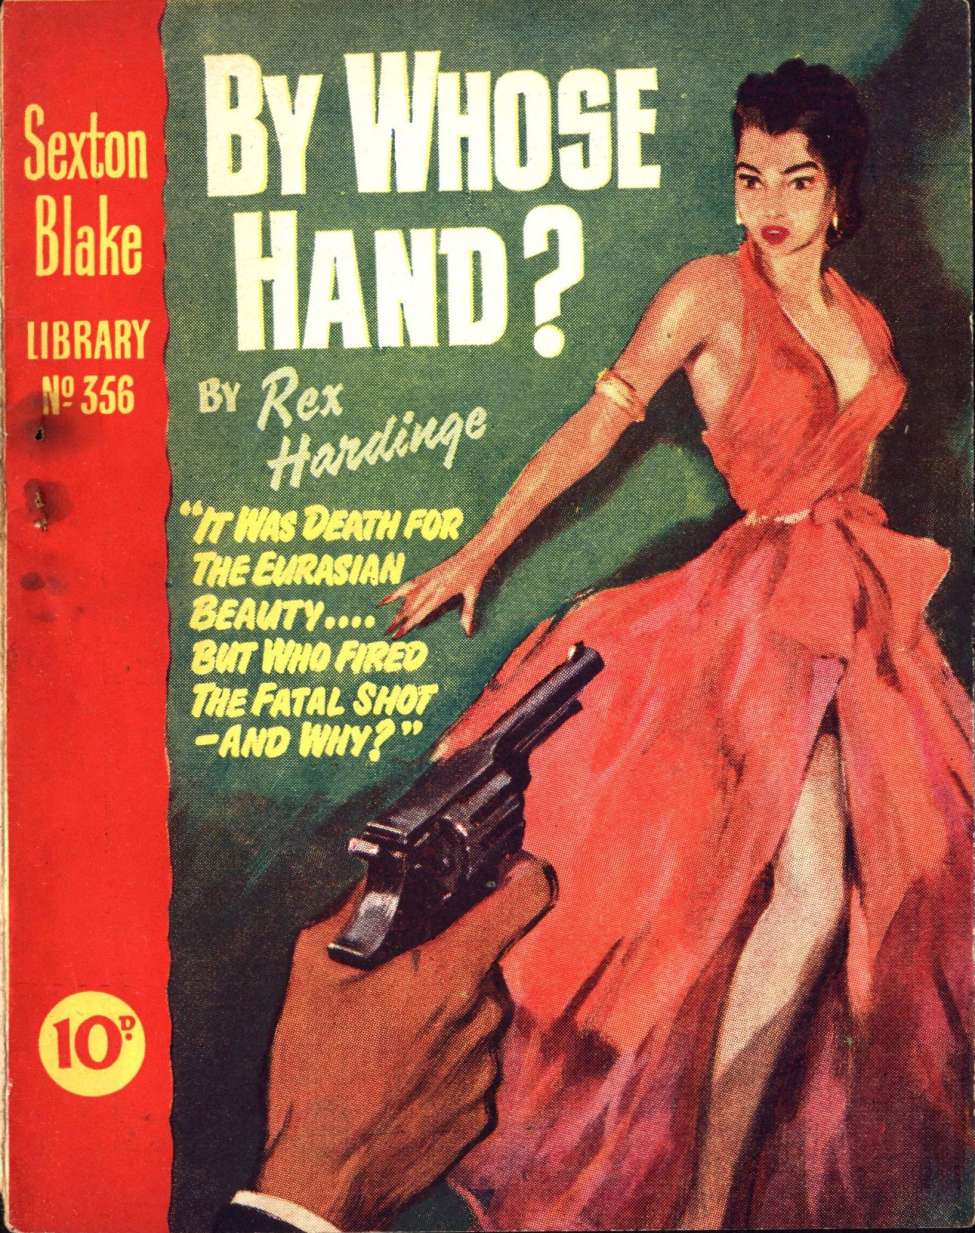 Book Cover For Sexton Blake Library S3 356 - By Whose Hand?